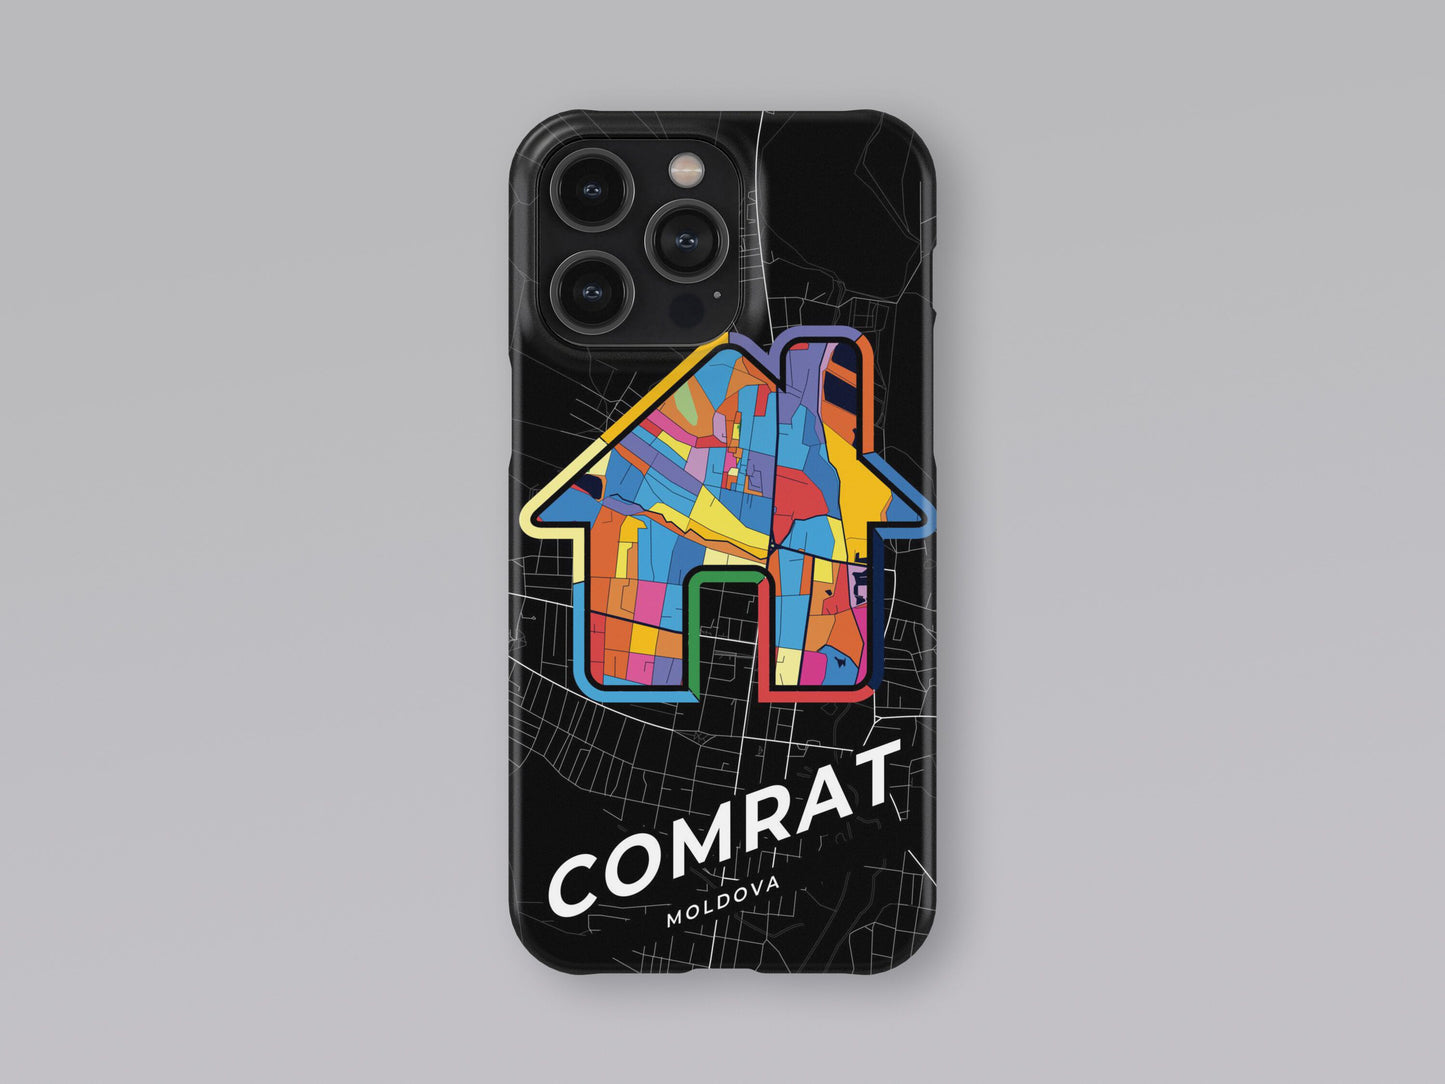 Comrat Moldova slim phone case with colorful icon. Birthday, wedding or housewarming gift. Couple match cases. 3